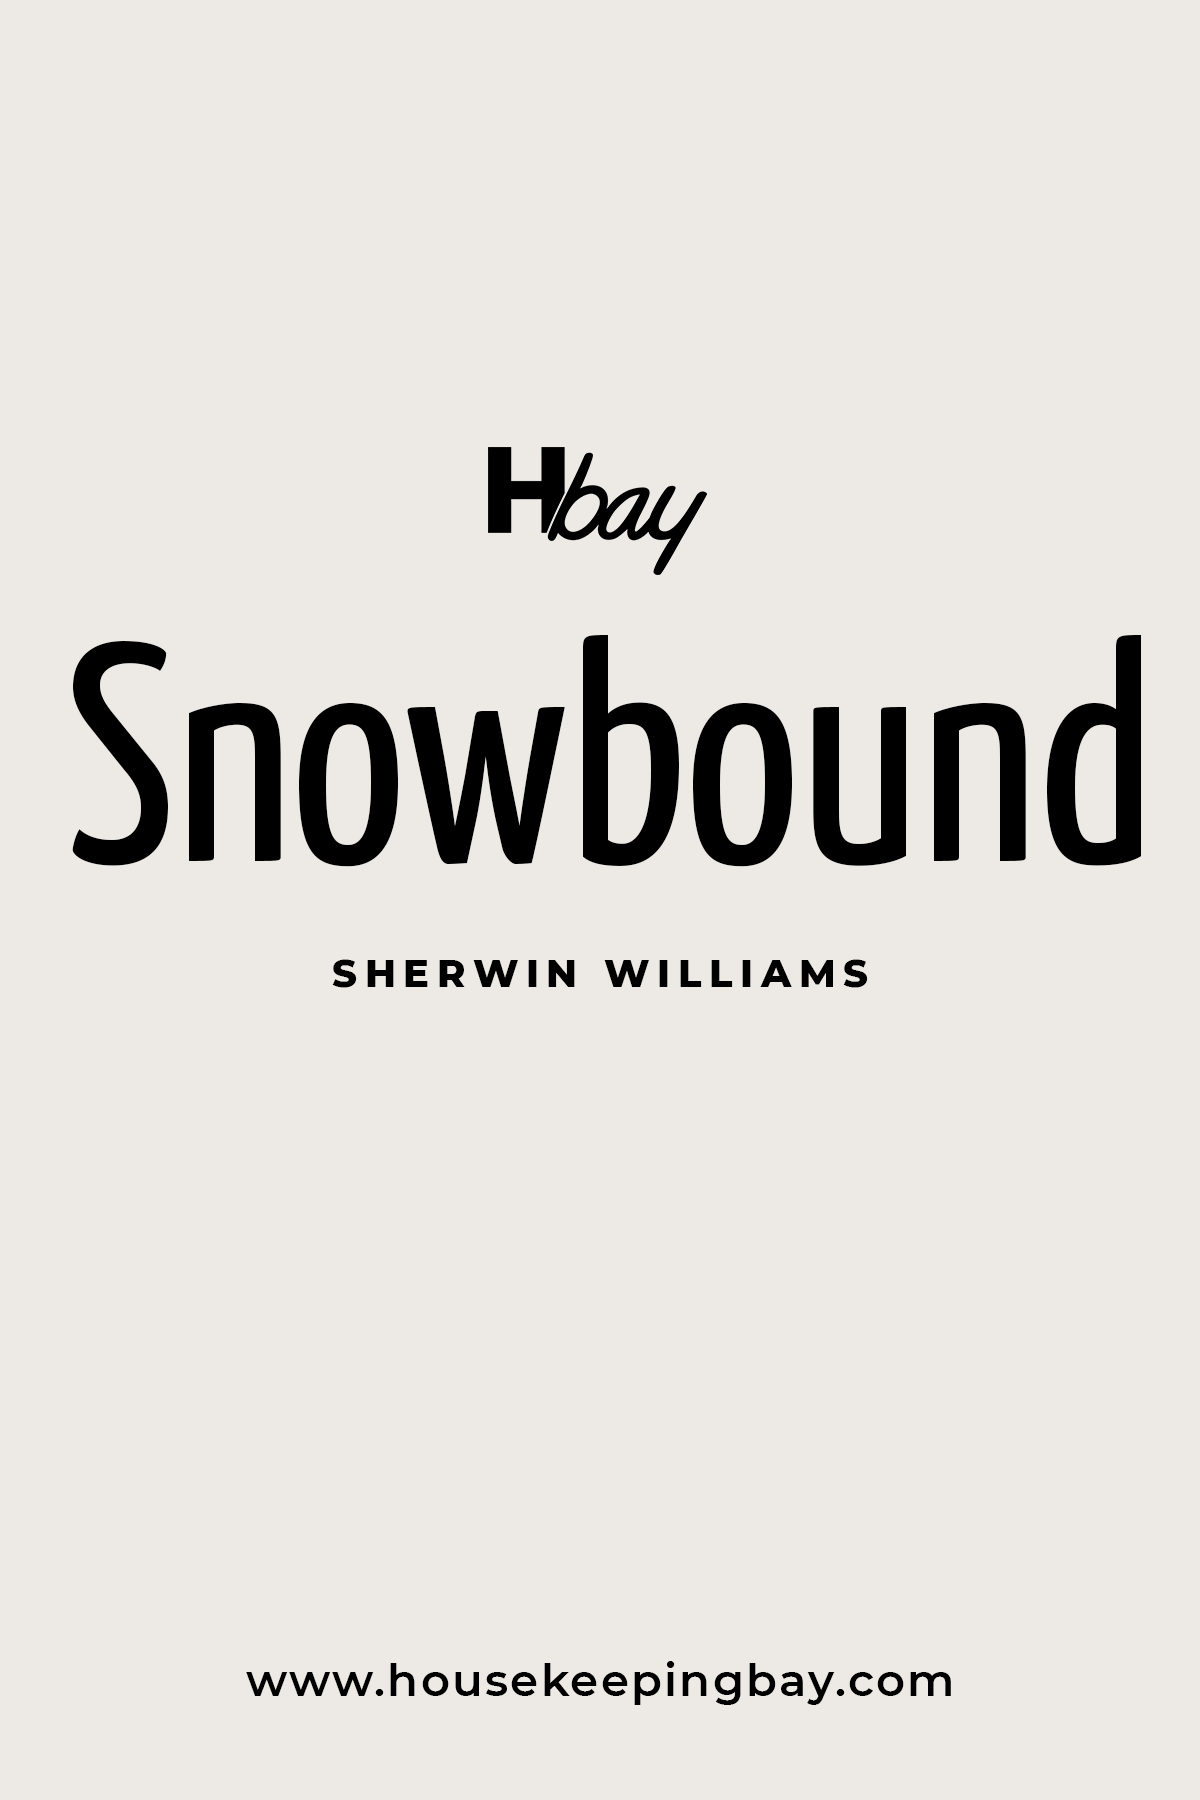 Snowbound by Sherwin Williams